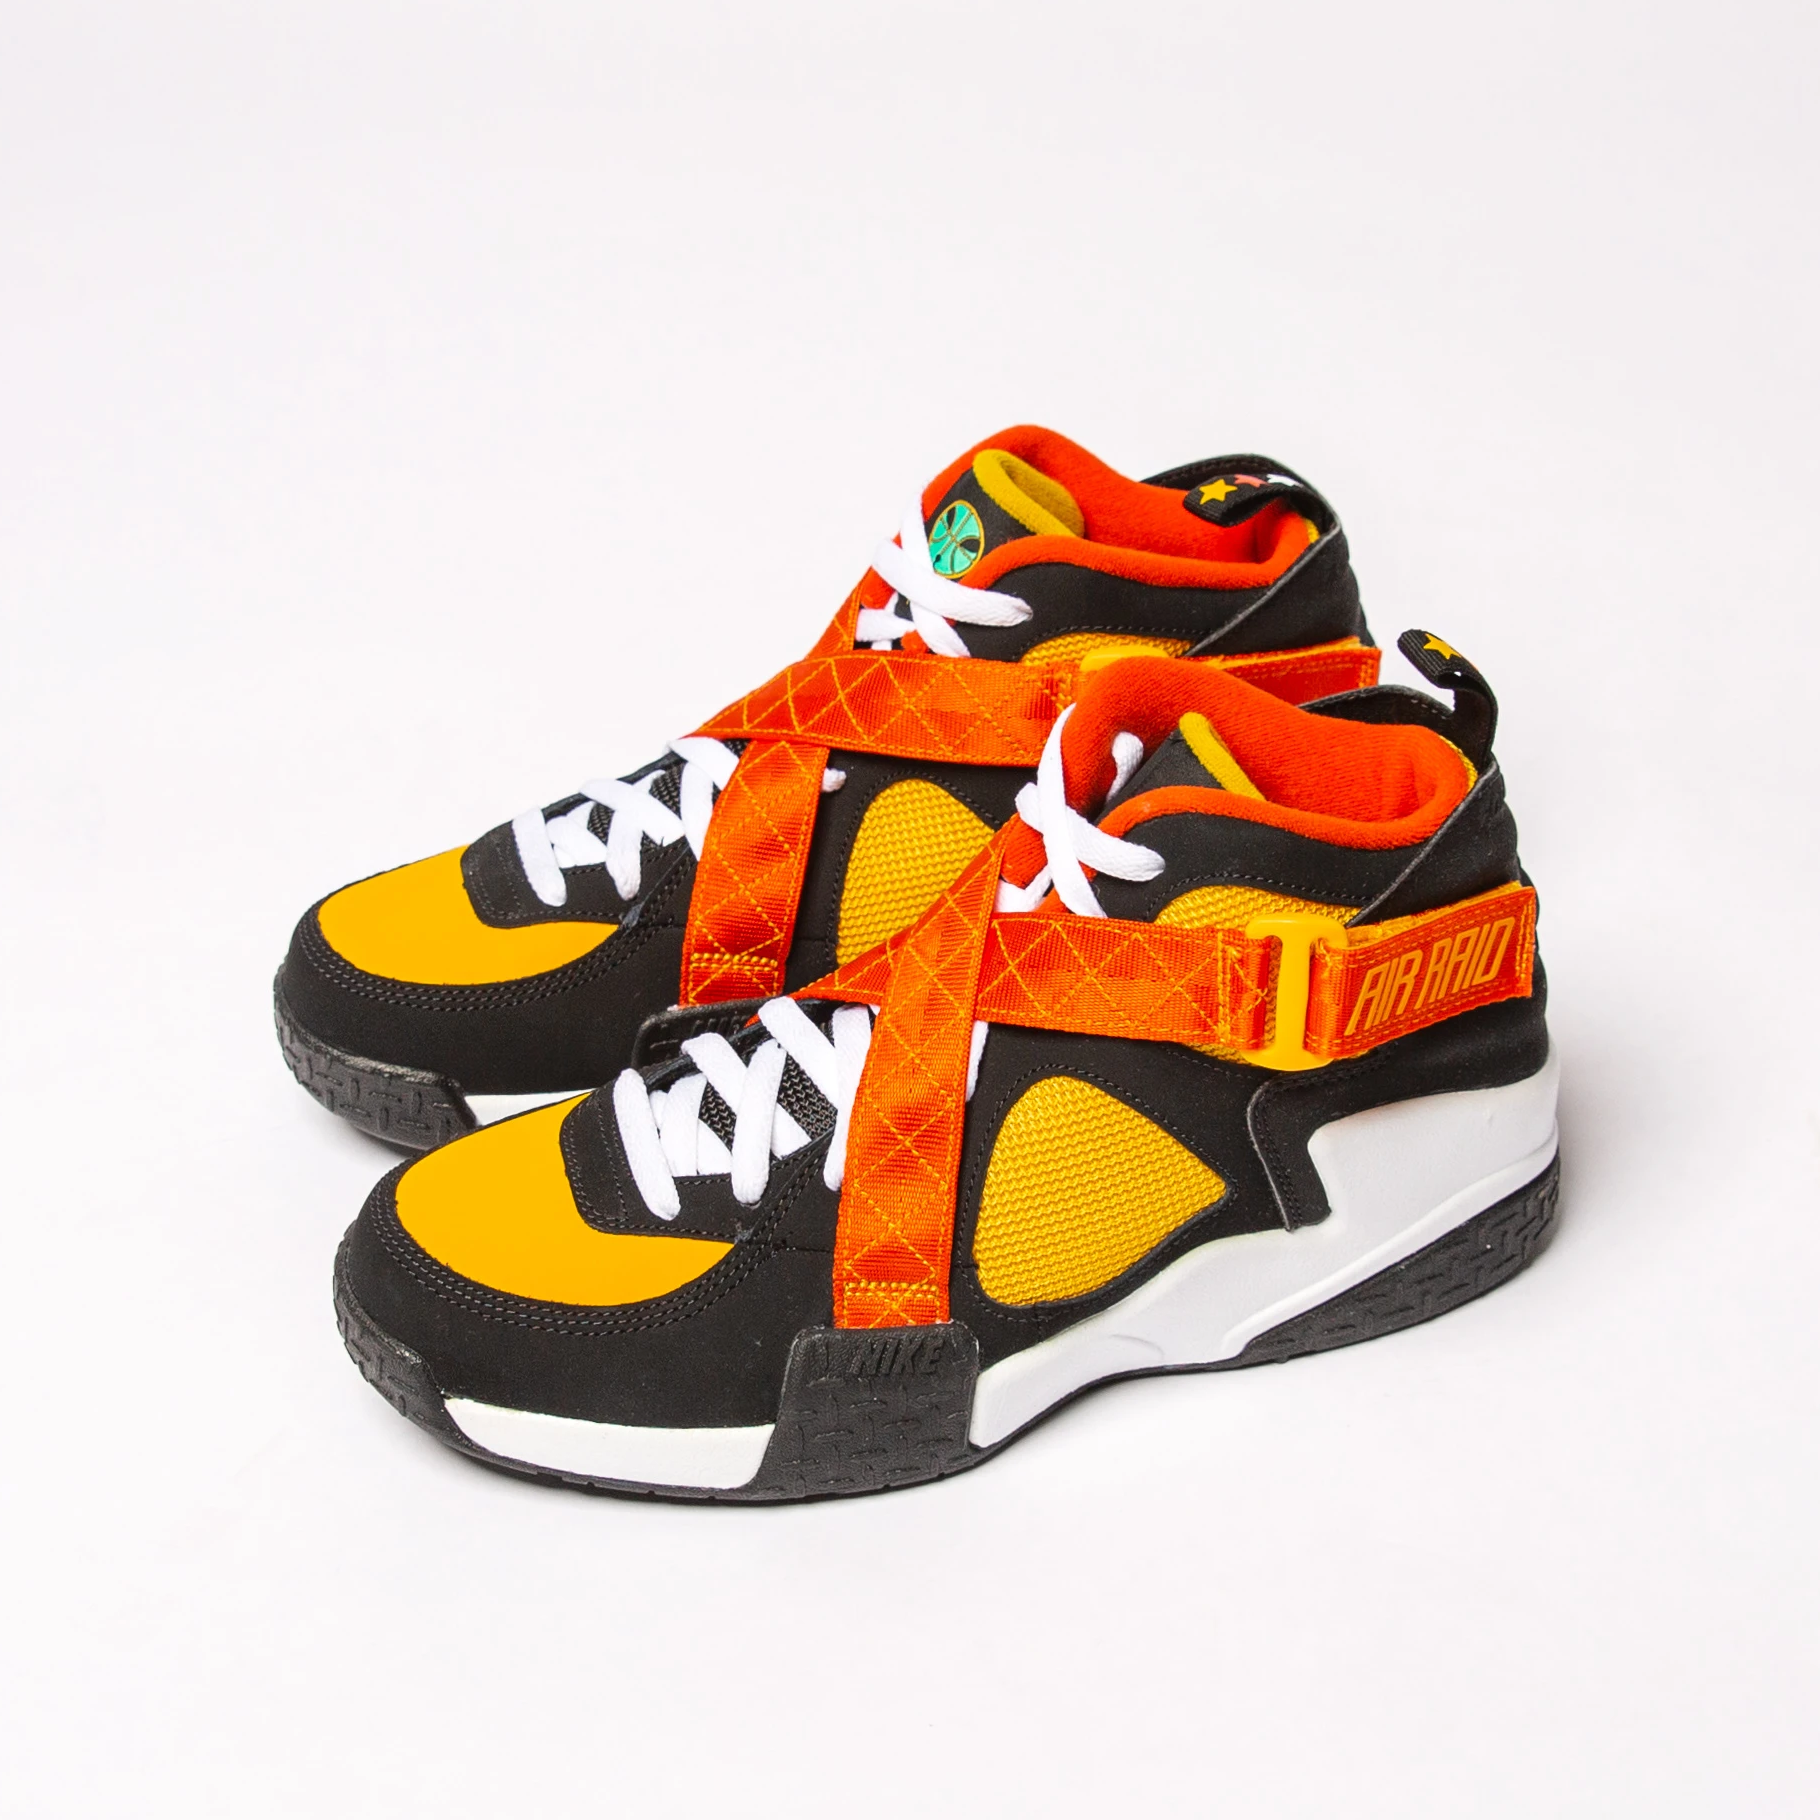 Now Available: Nike Air Raid OG Raygun — Sneaker Shouts